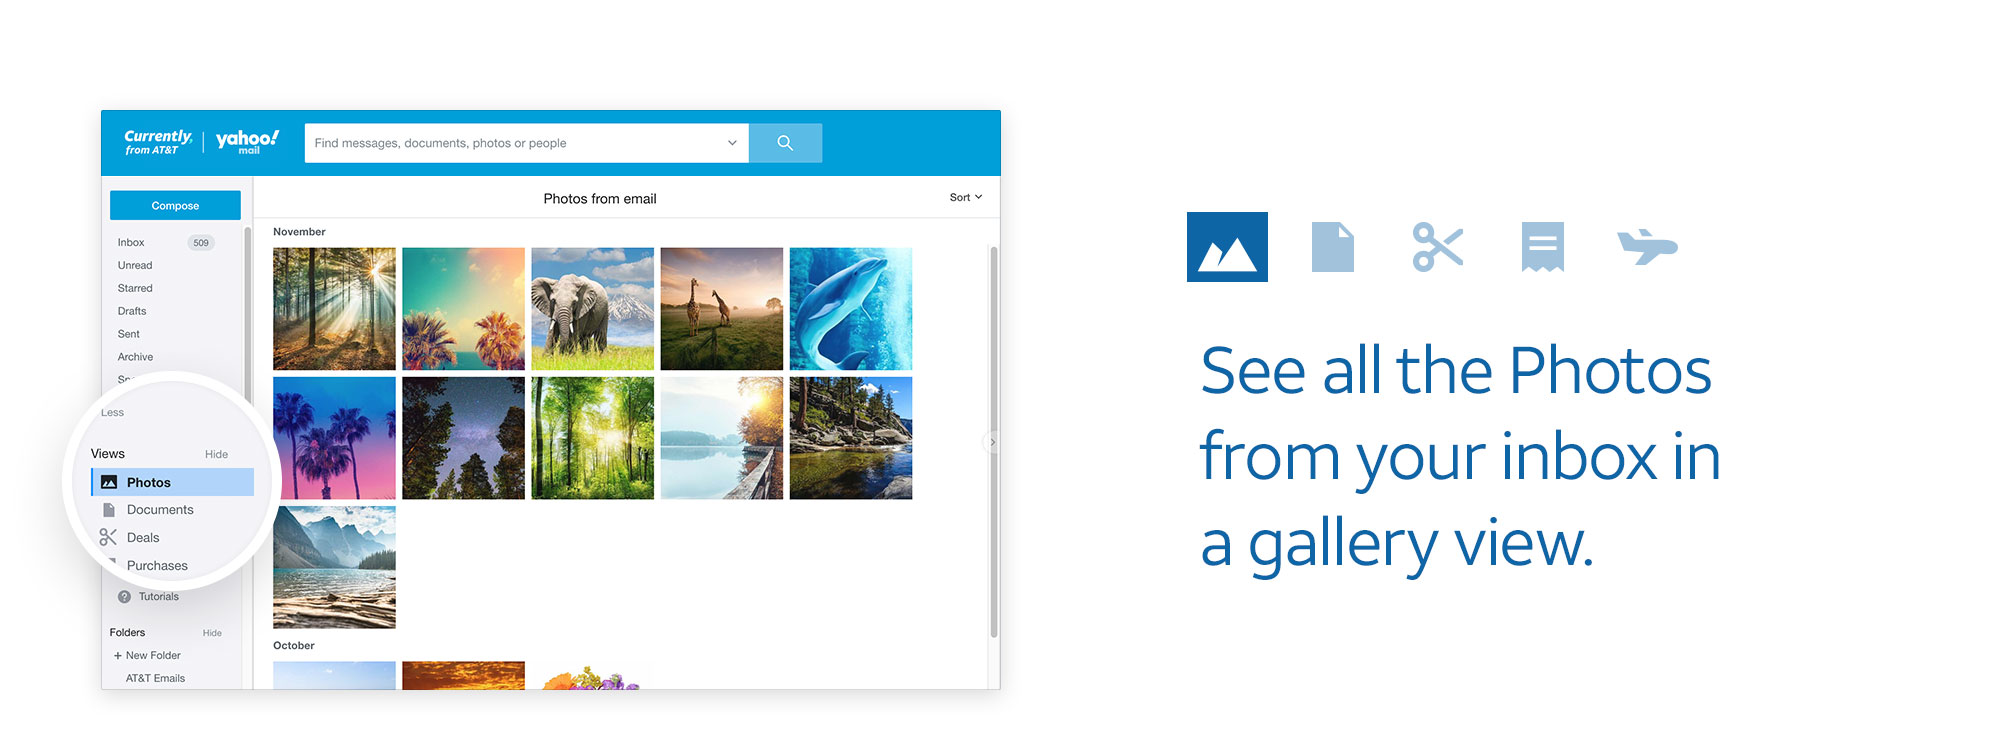 AT&T Mail photo storage, att.net and Currently email login